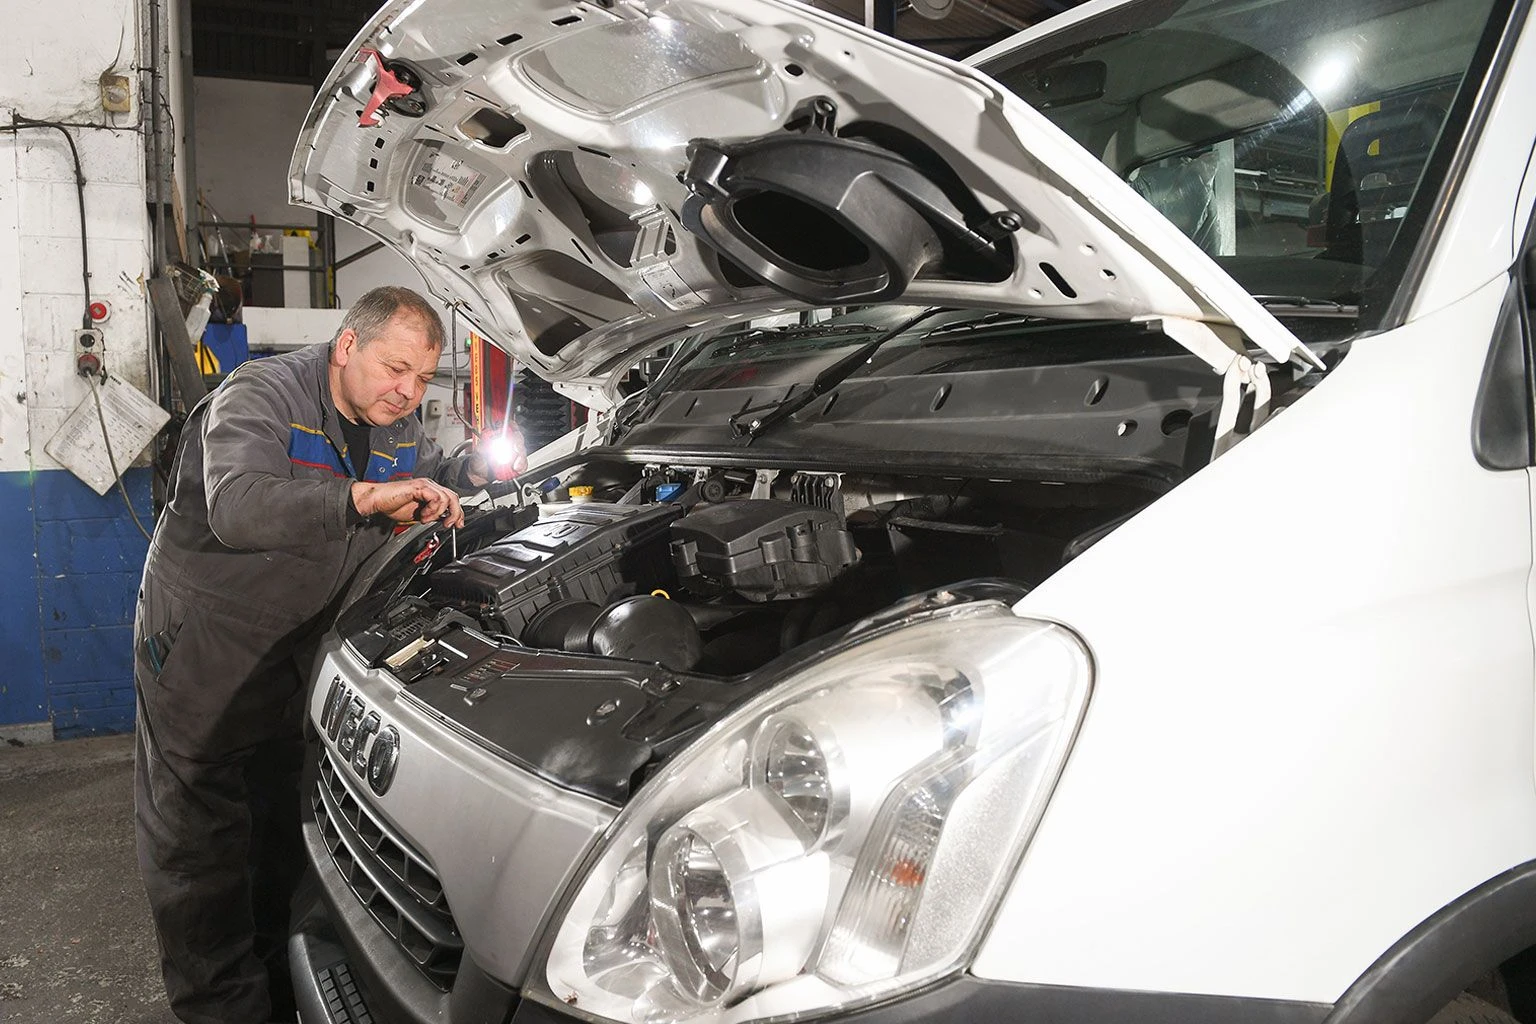 IVECO Service and MOT - 24 hours, 7 days a week